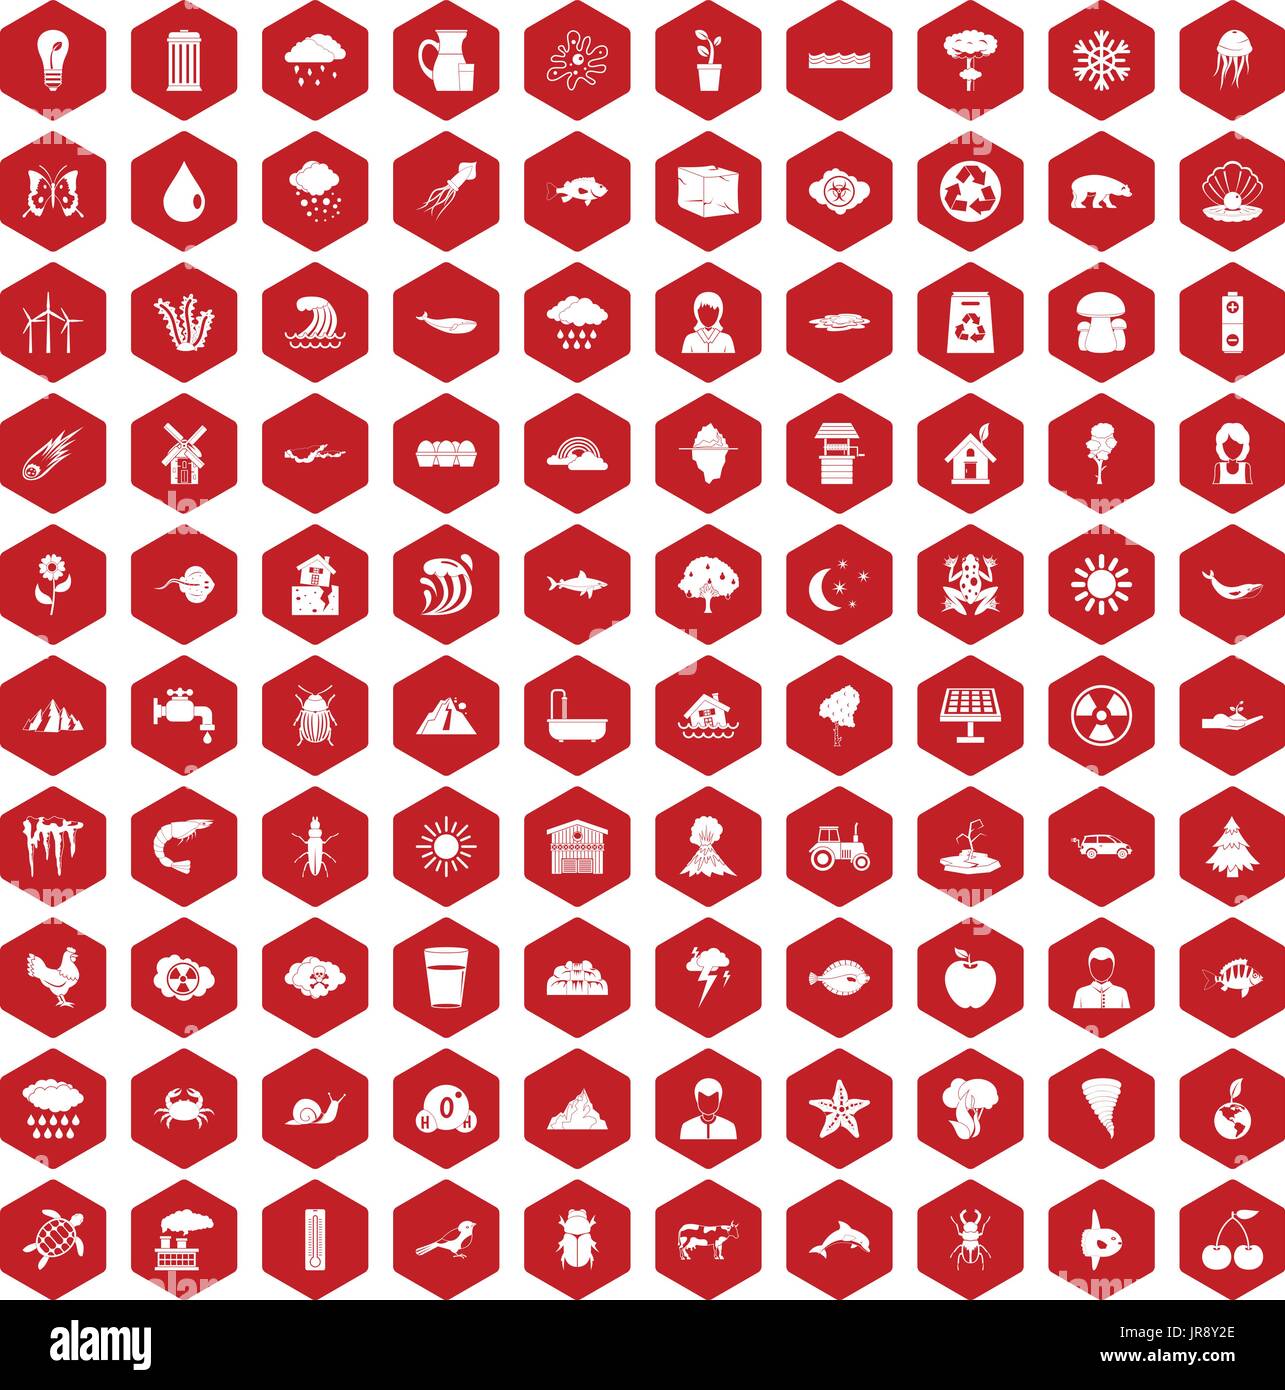 100 earth icons hexagon red Stock Vector